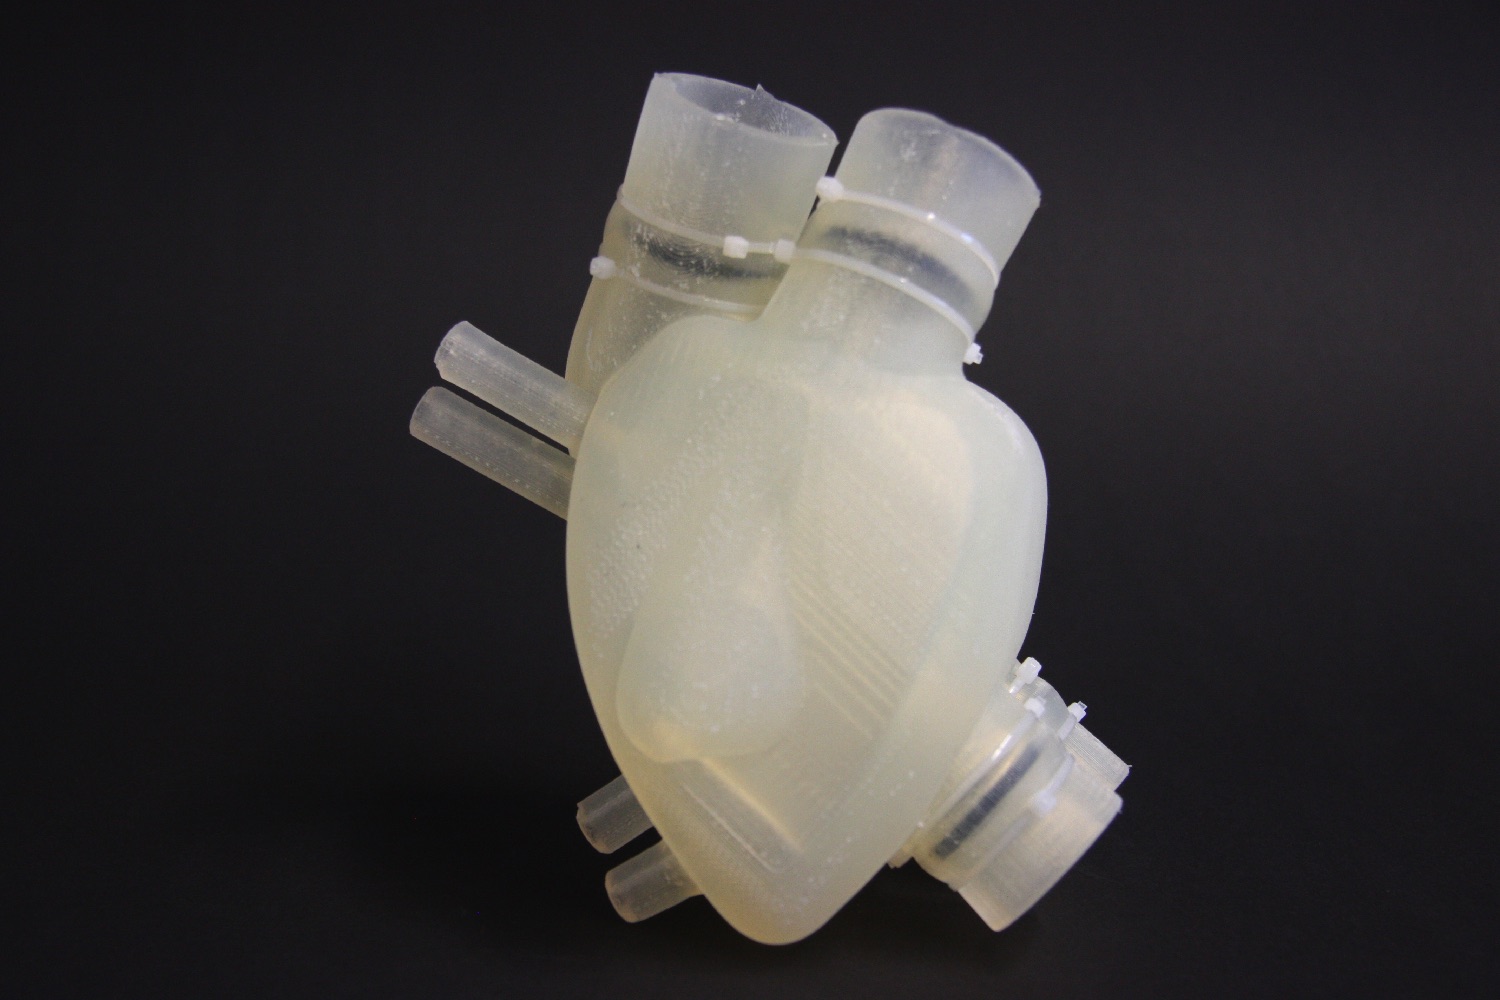 3d printed silicone heart img 8040